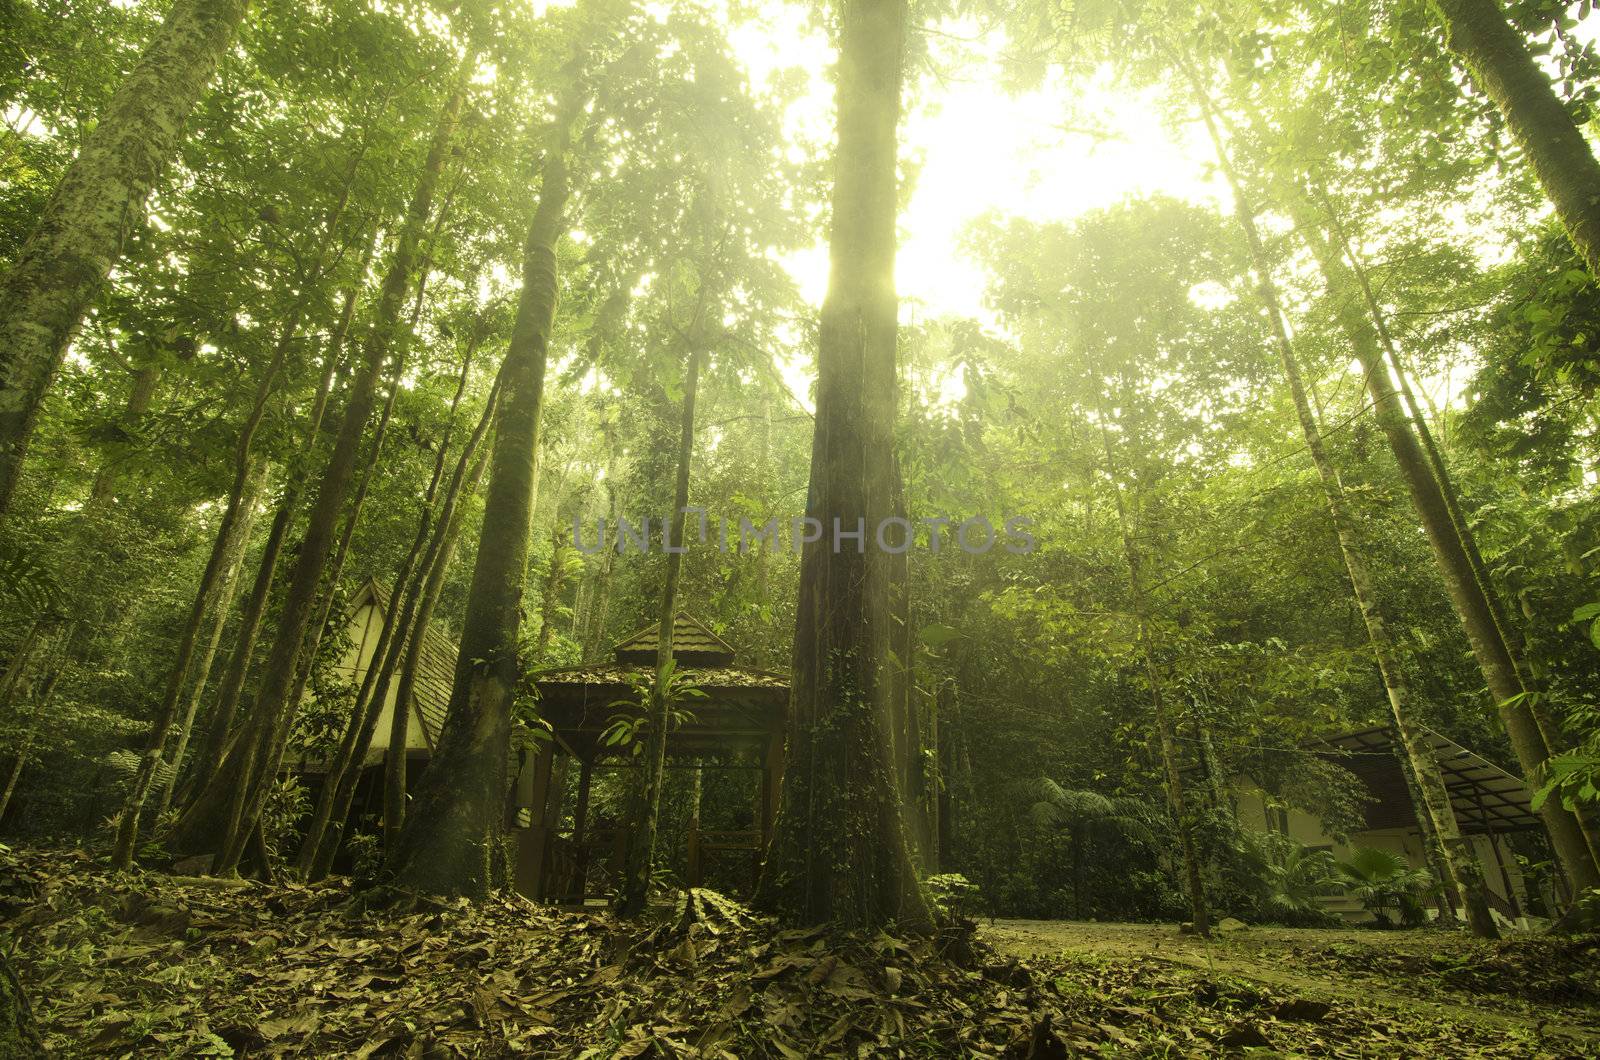 rain forest by yuliang11